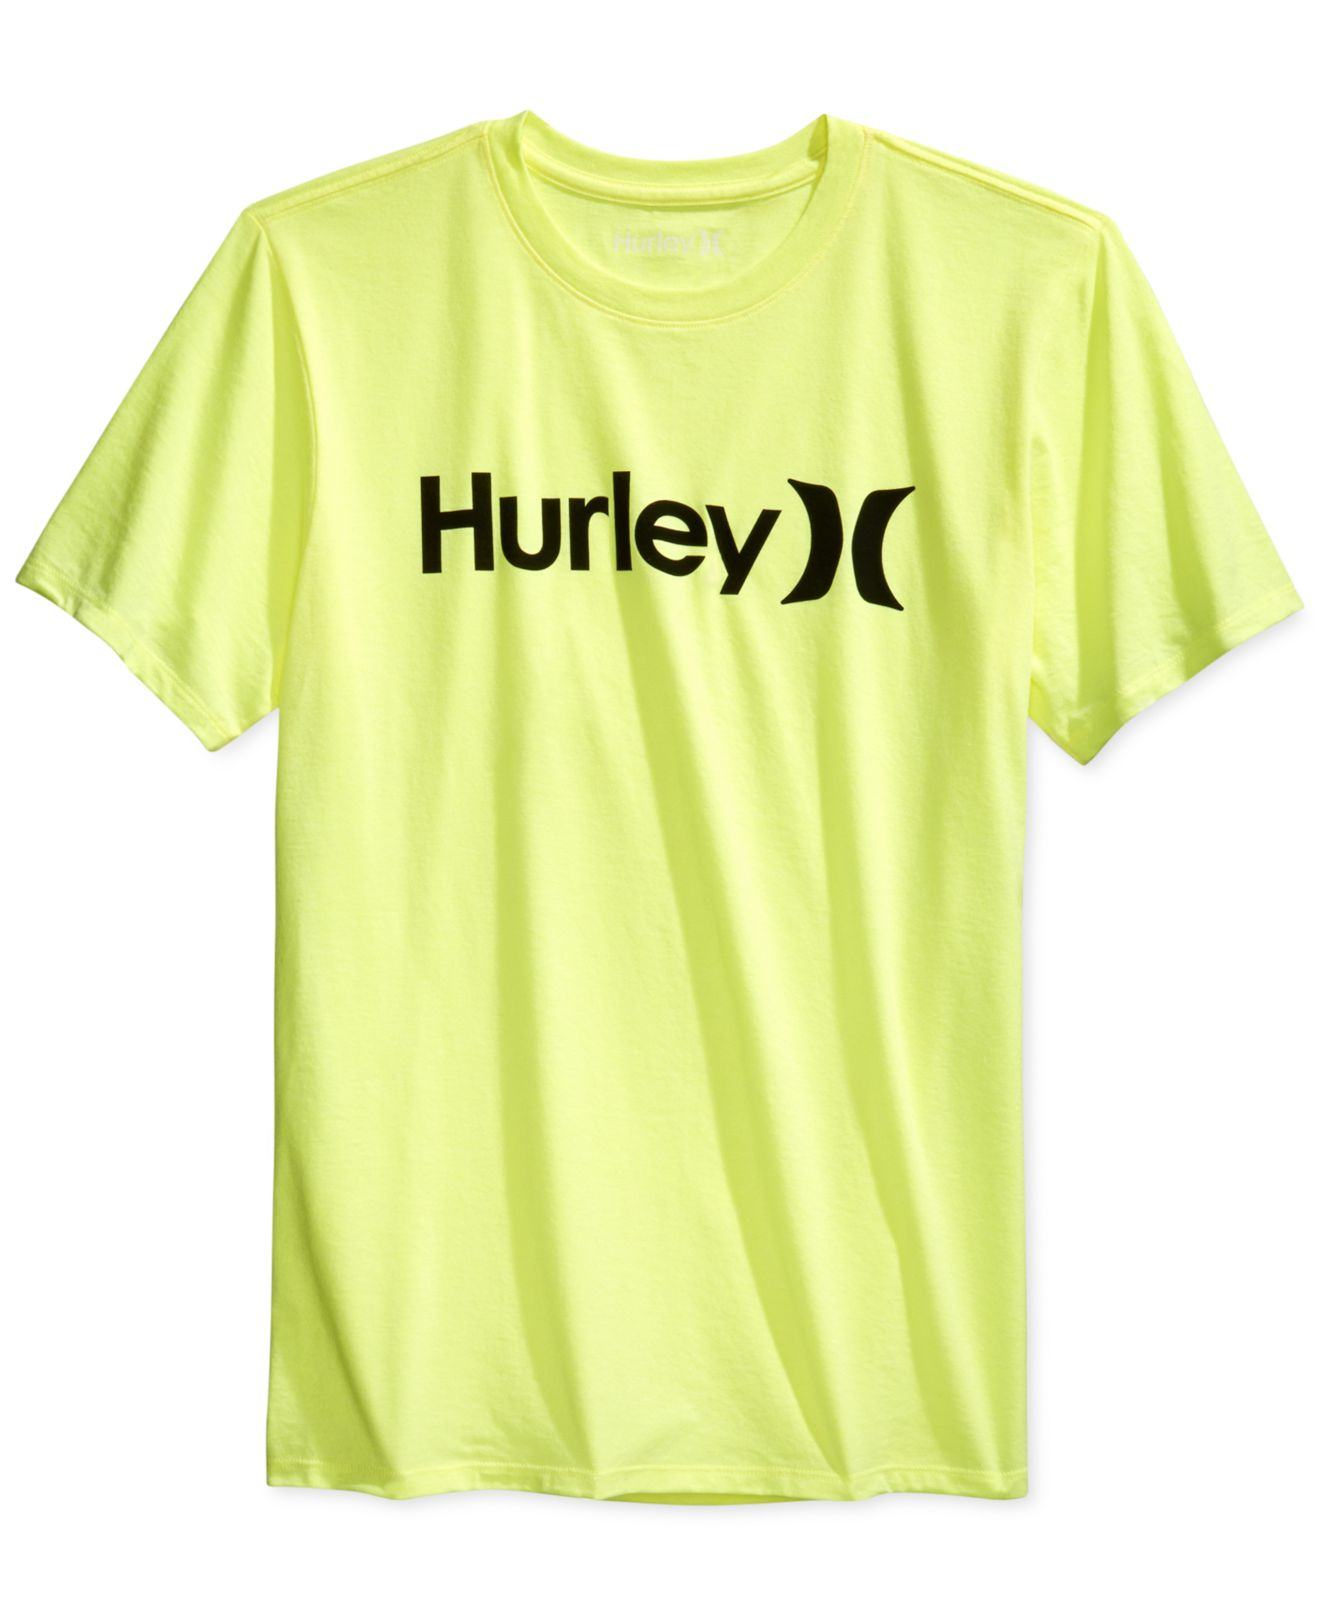 Lyst - Hurley One & Only Color Premium T-shirt in Yellow for Men1320 x 1616